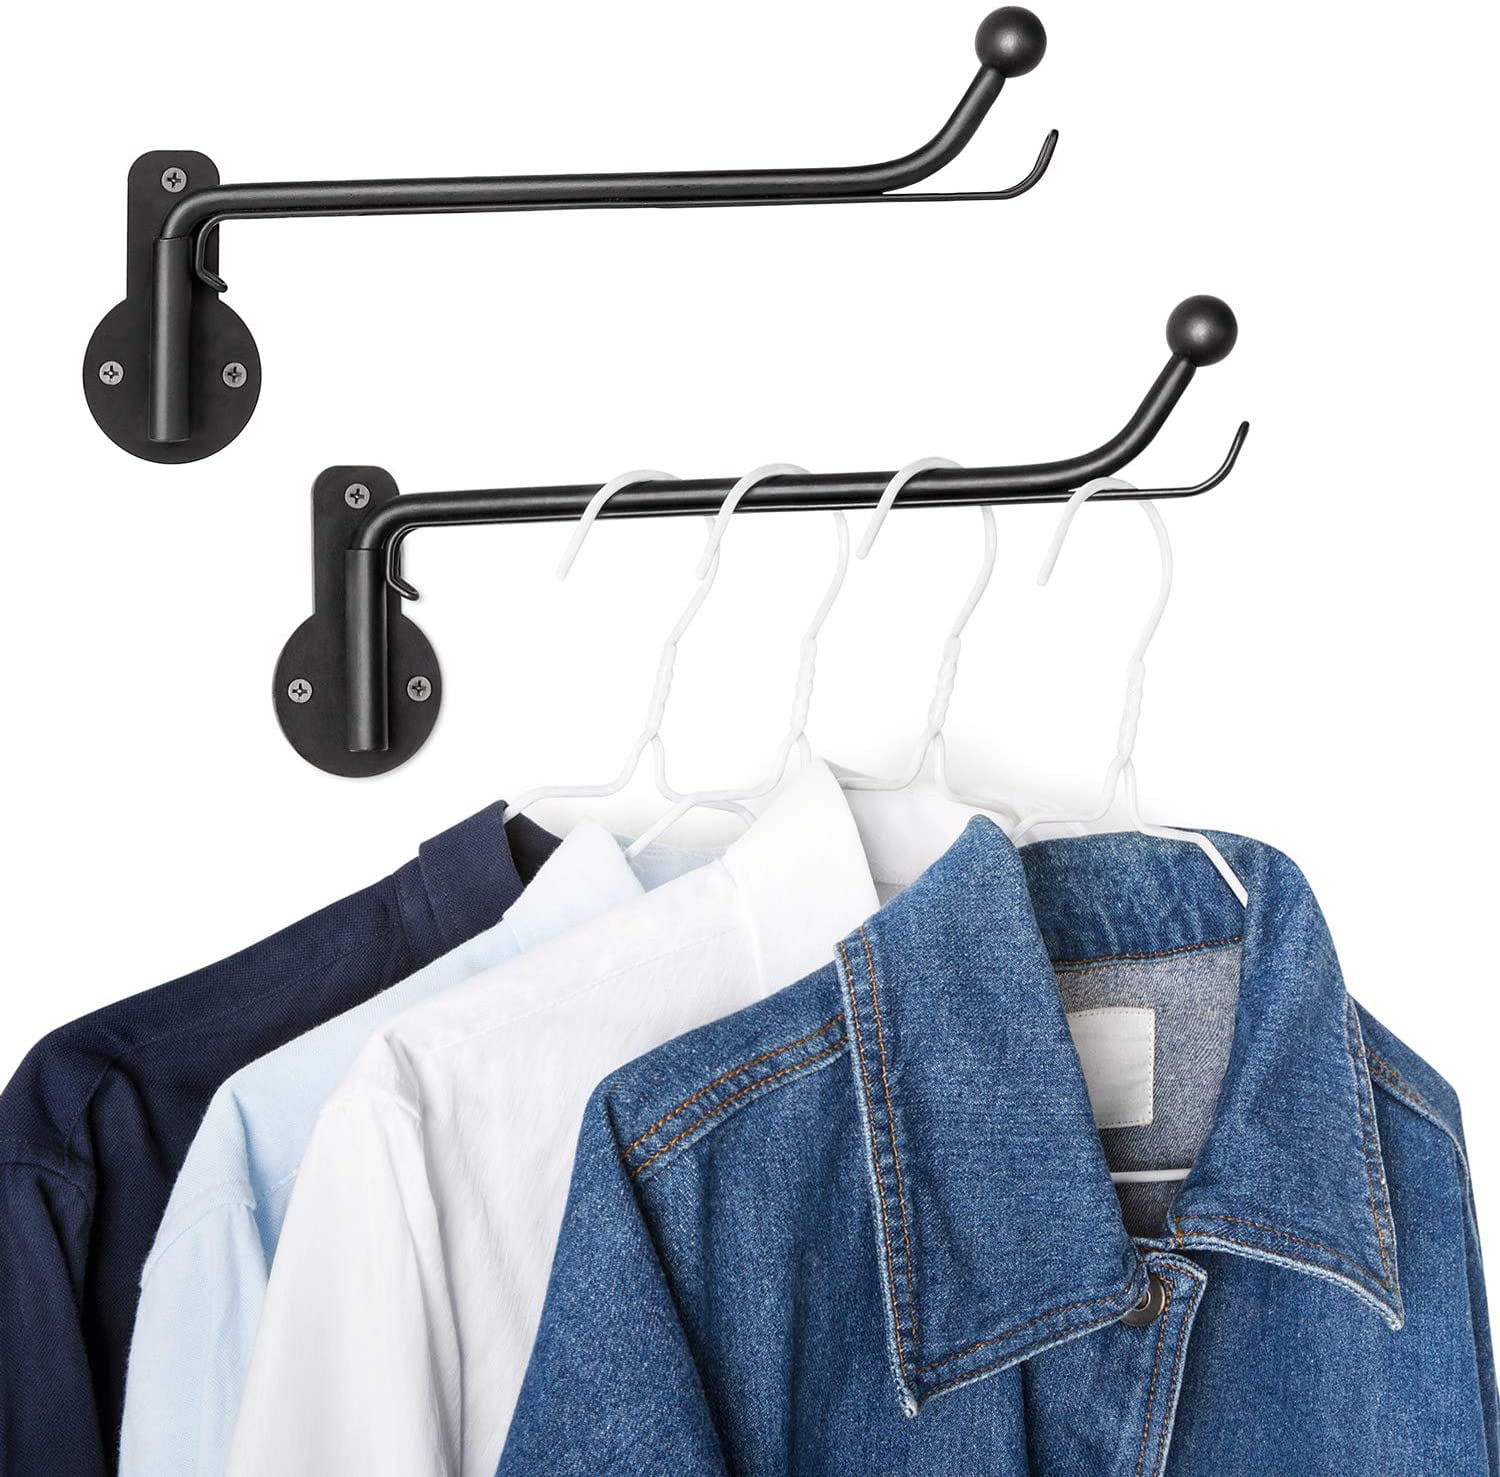 Golden Home Wall Mounted Clothes Hanger with Swing Arm Holder Valet ...